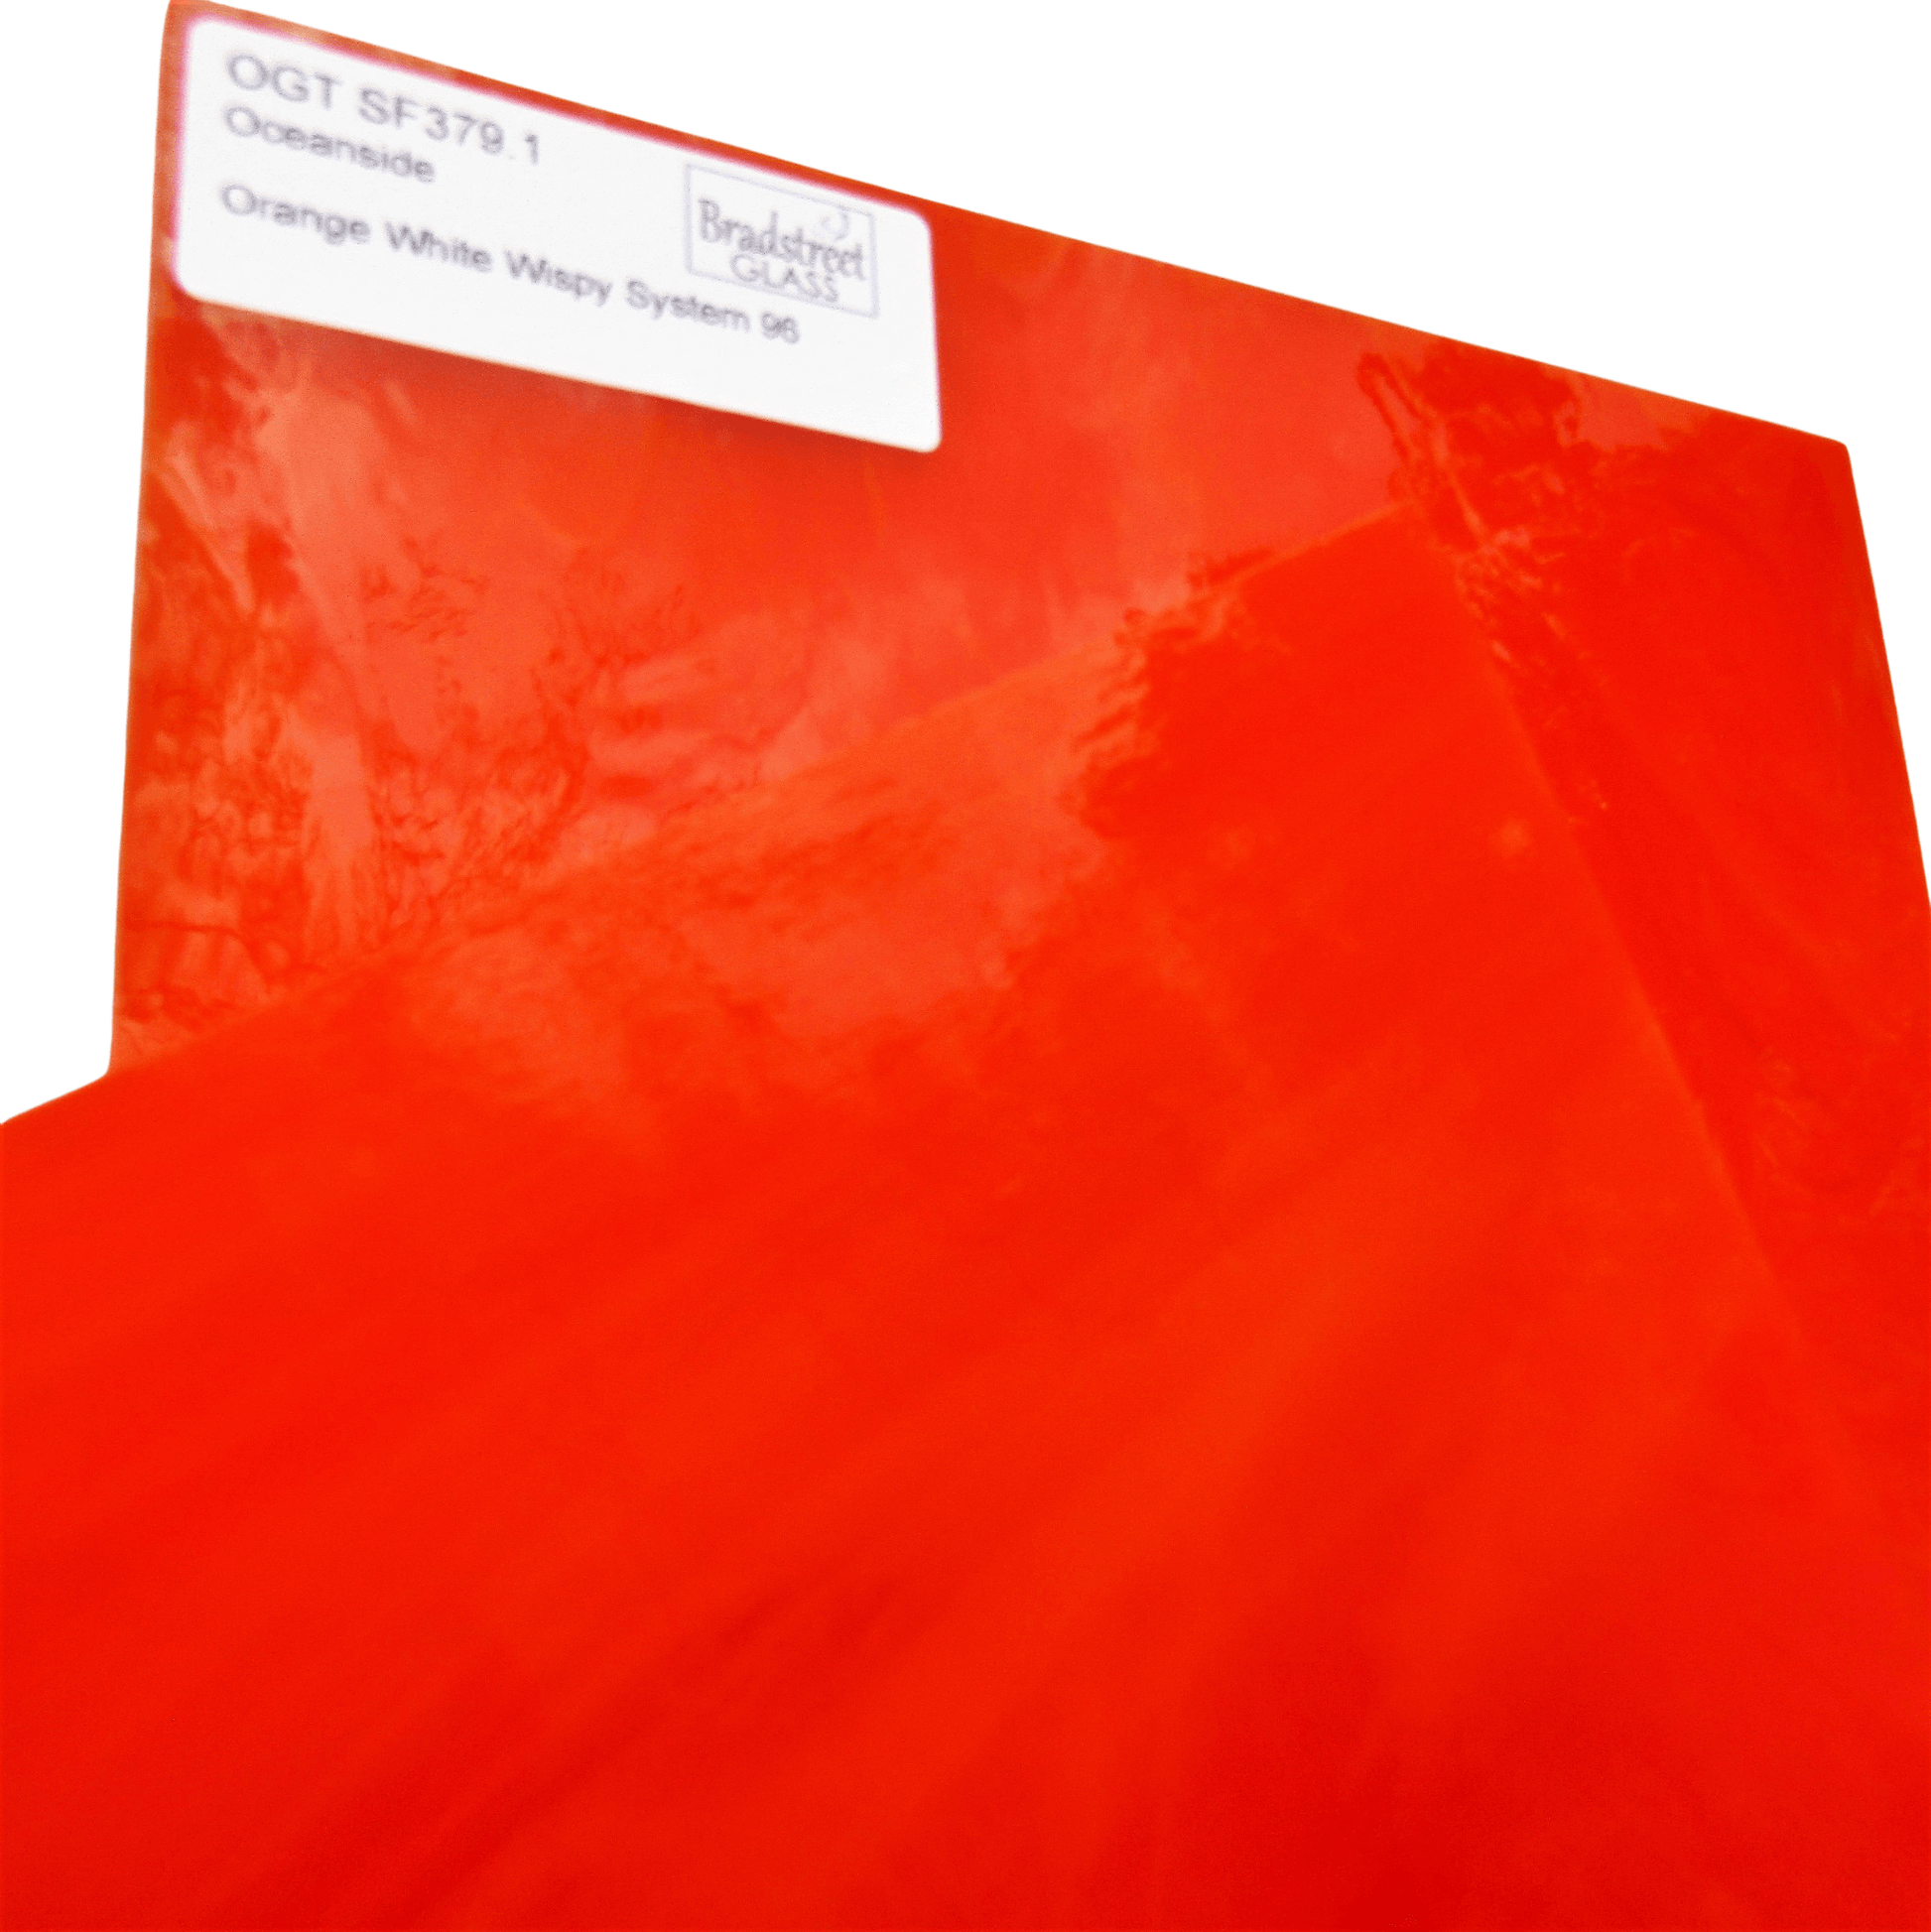 Orange and White Wispy Stained Glass Sheet 96 COE Oceanside Fusible SF379.1